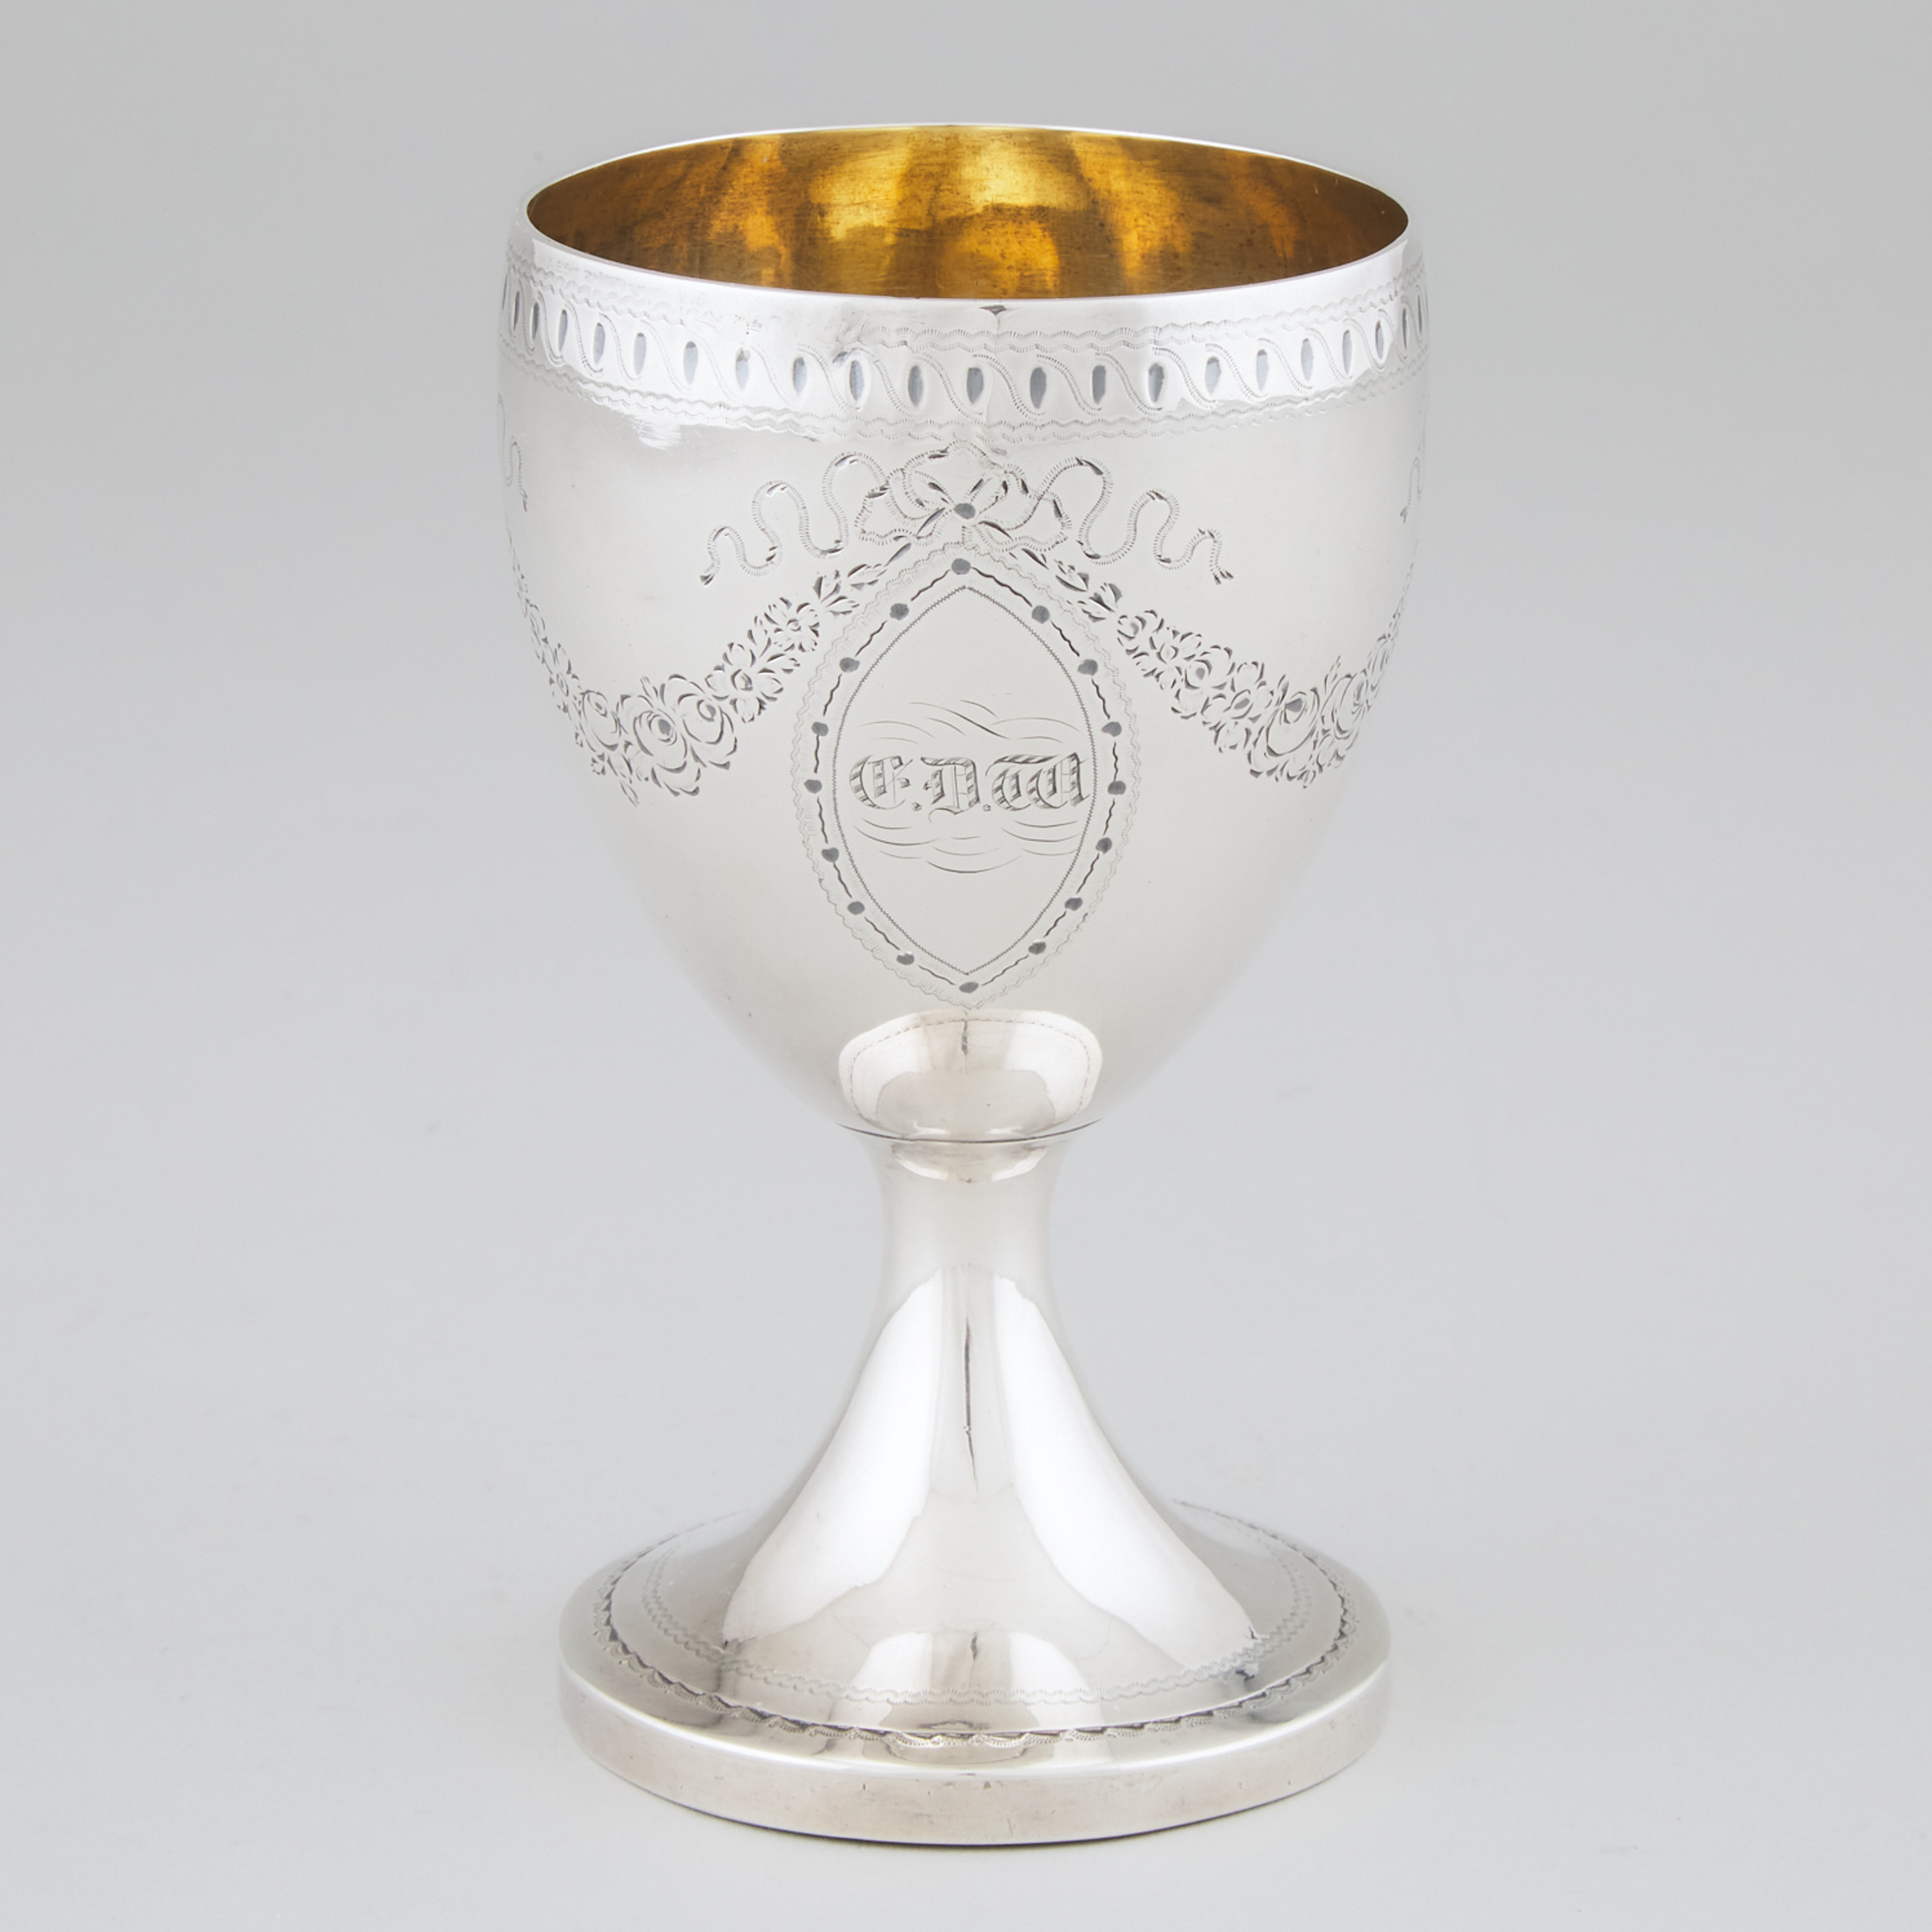 George III Silver Goblet, late 18th century